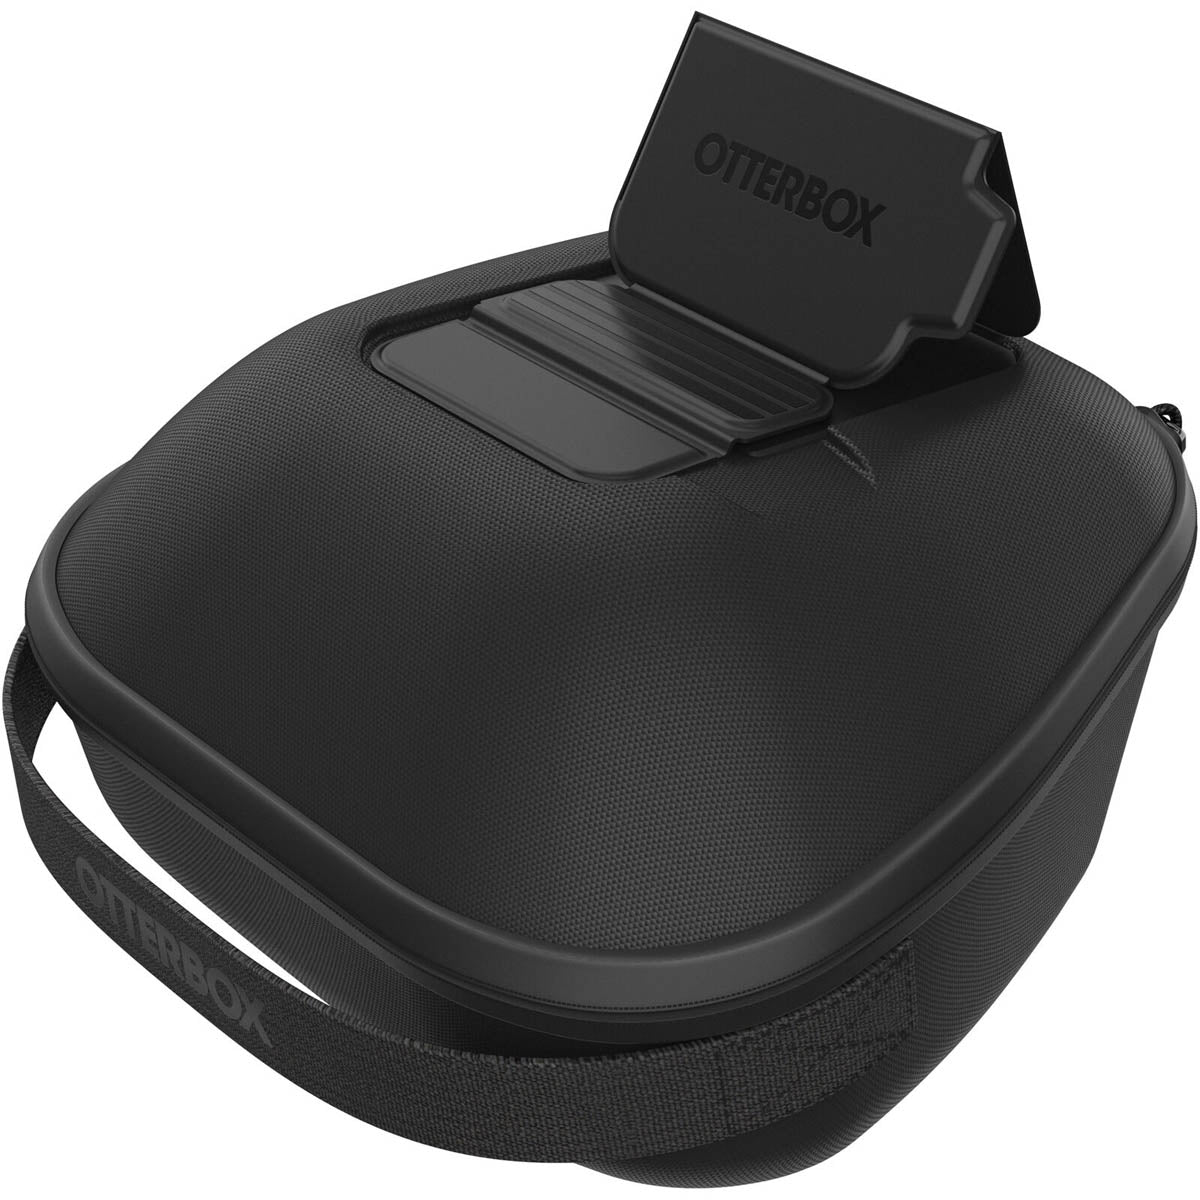 Otterbox Gaming Carry Case - Black